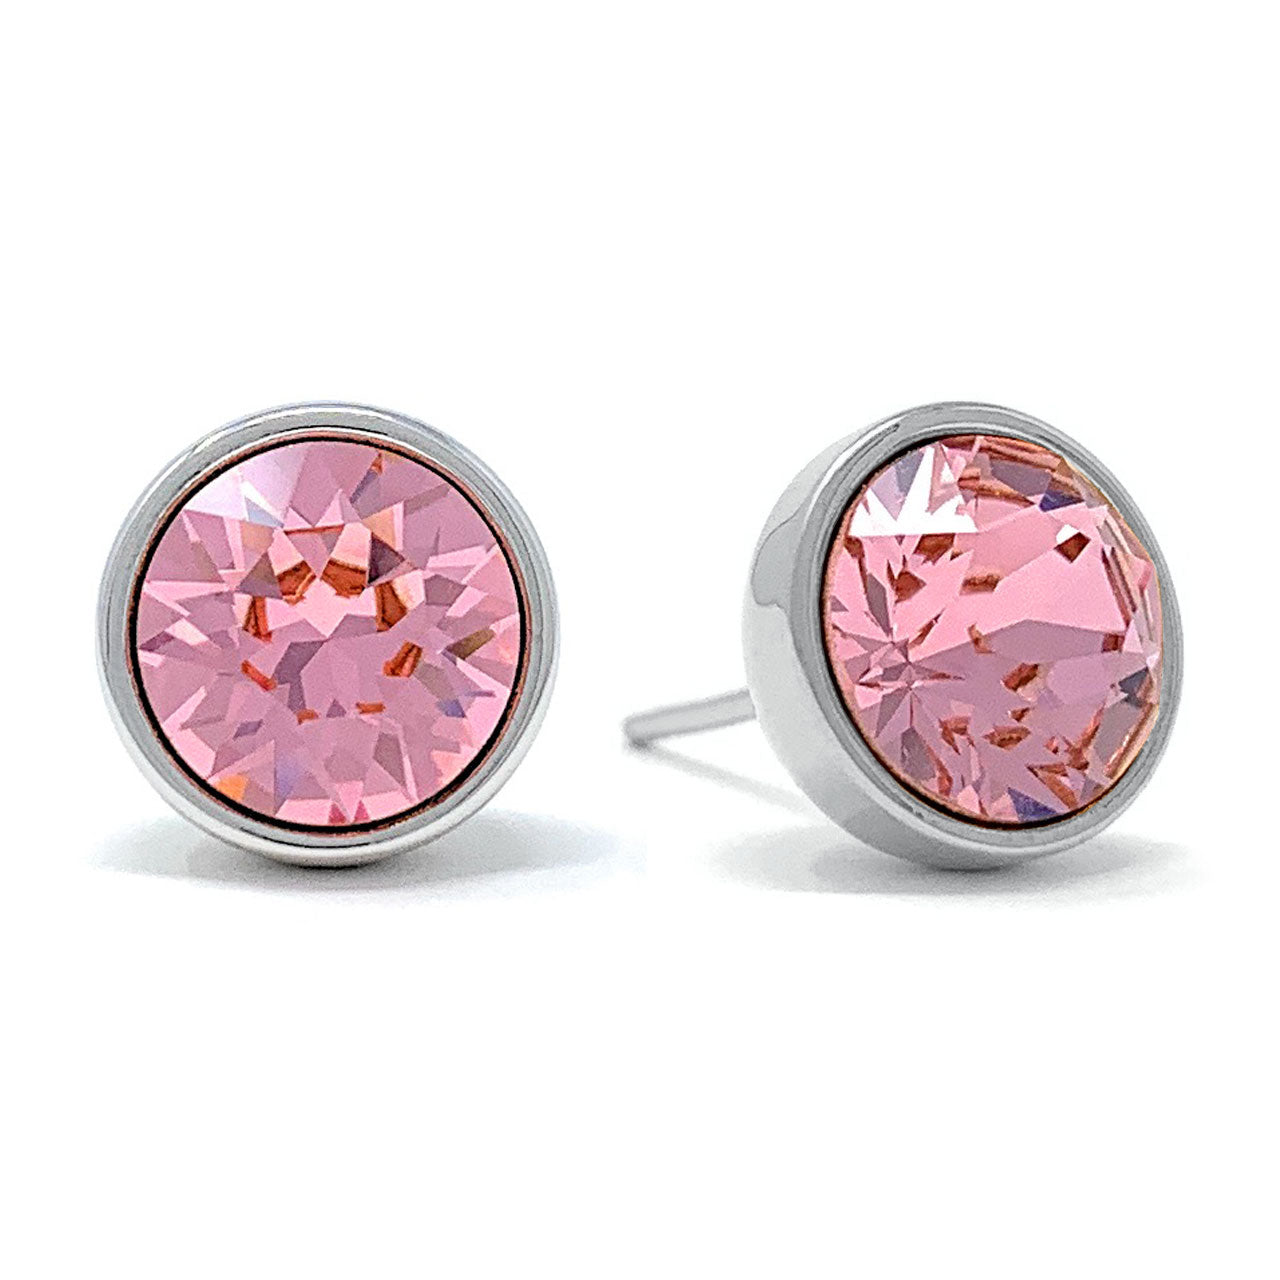 Harley Stud Earrings with Pink Light Rose Round Crystals from Swarovski Silver Toned Rhodium Plated - Ed Heart